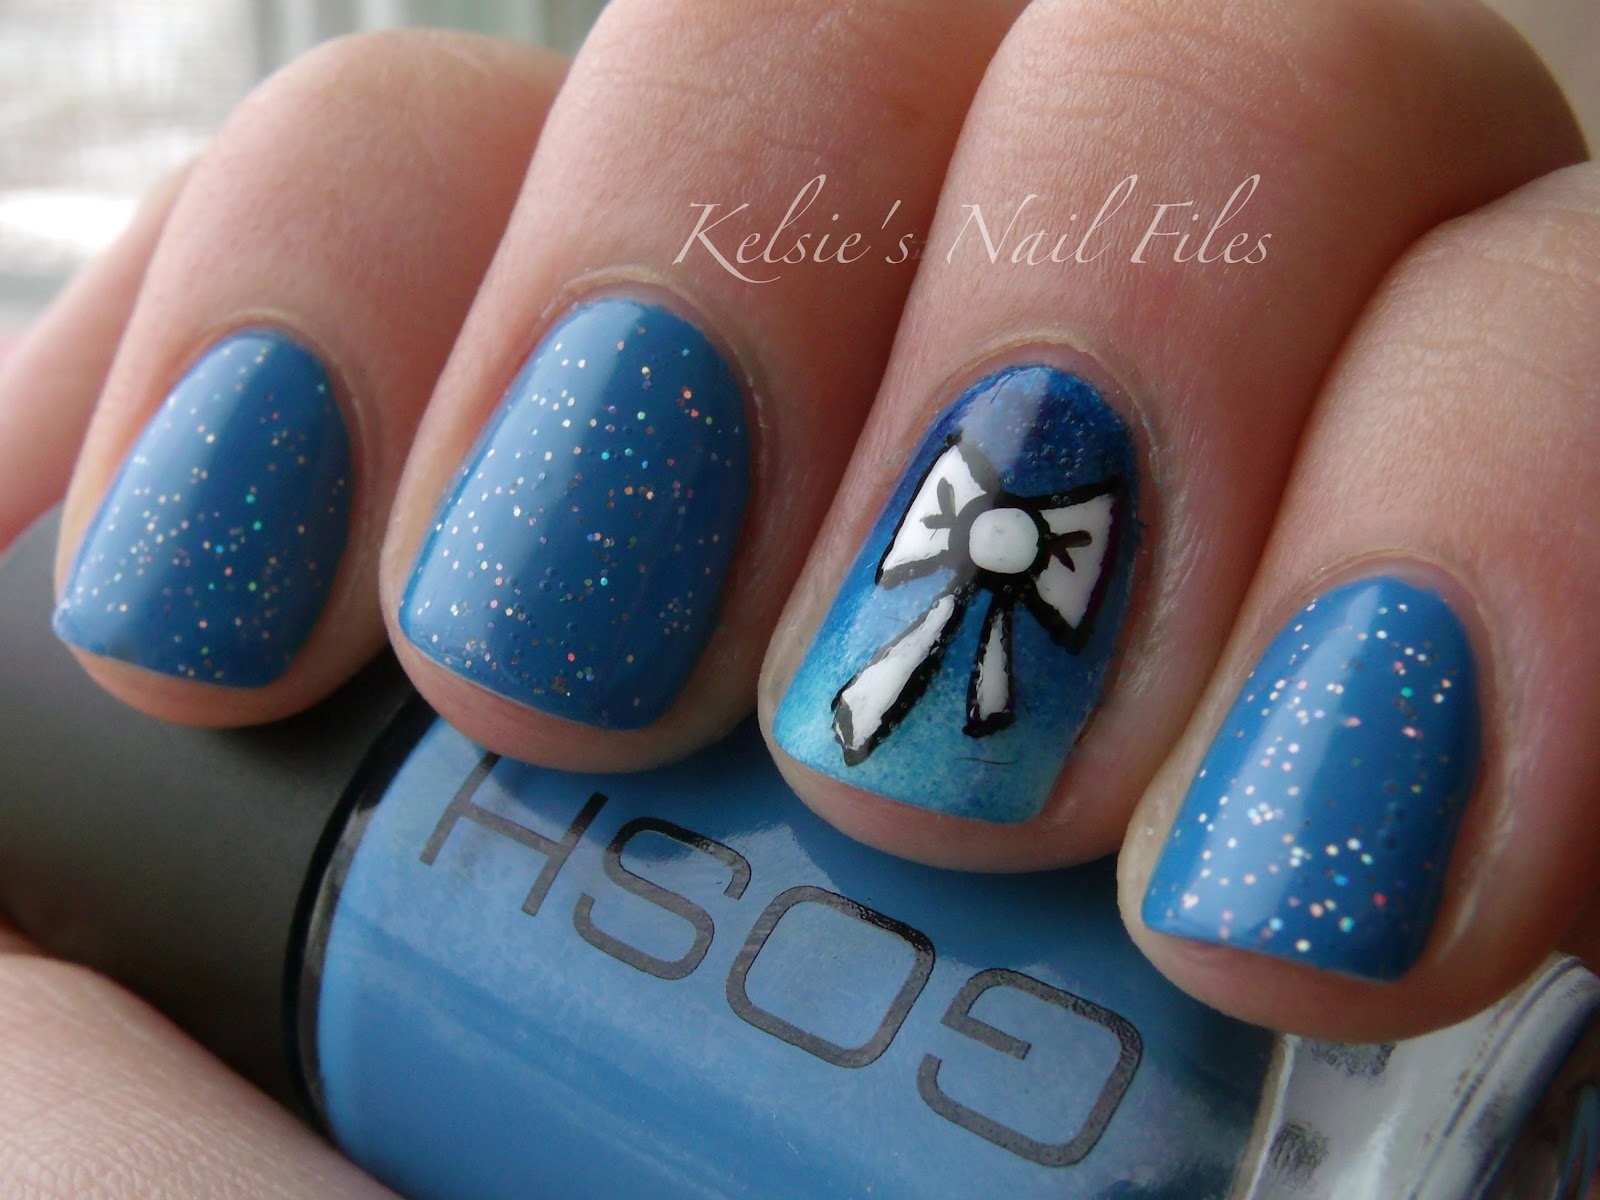 kelsie's nail files: Gradient and a bow for rebeccalikesnails